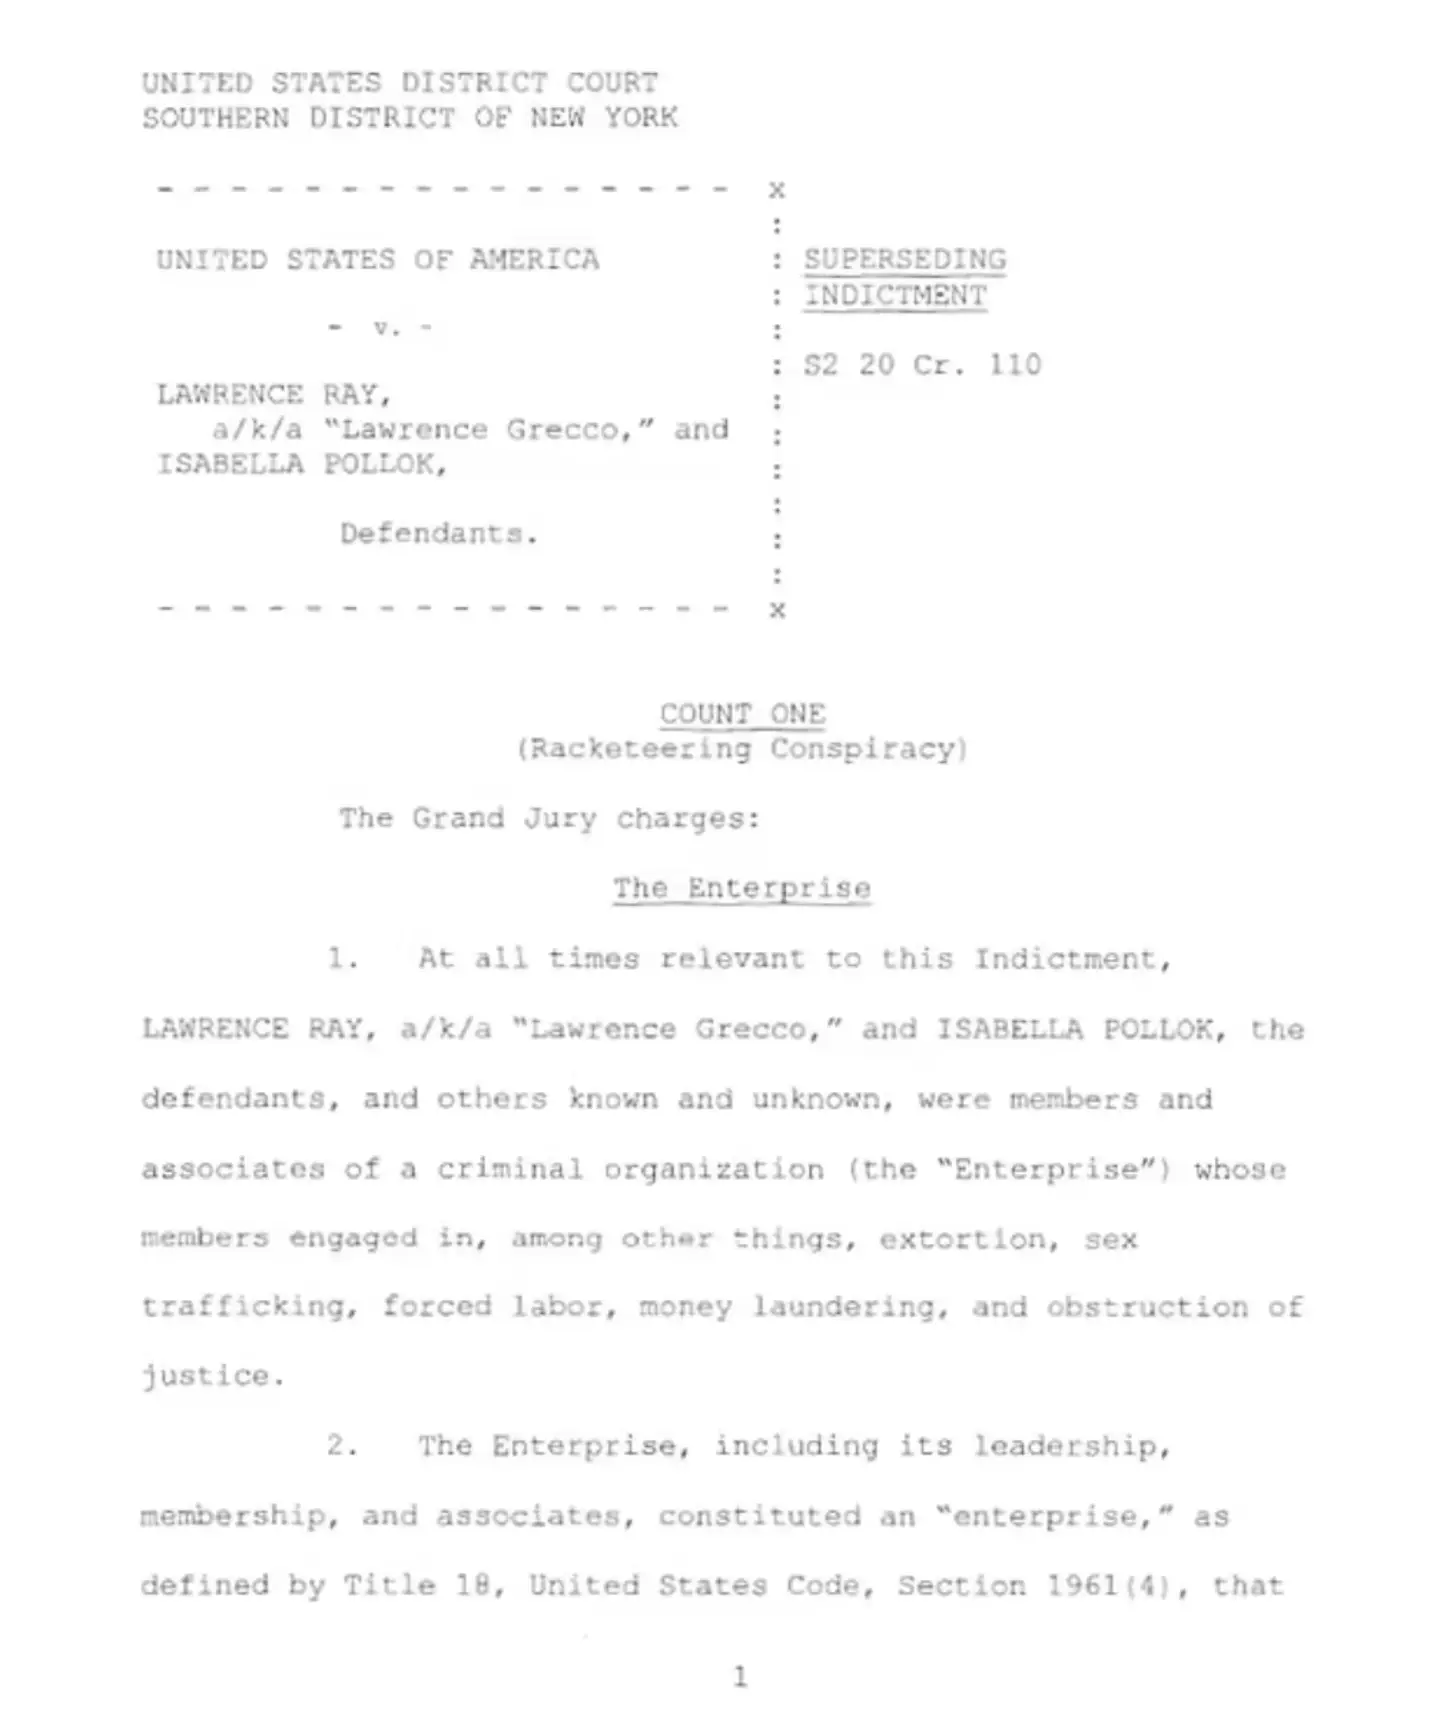 Lawrence Ray's indictment.